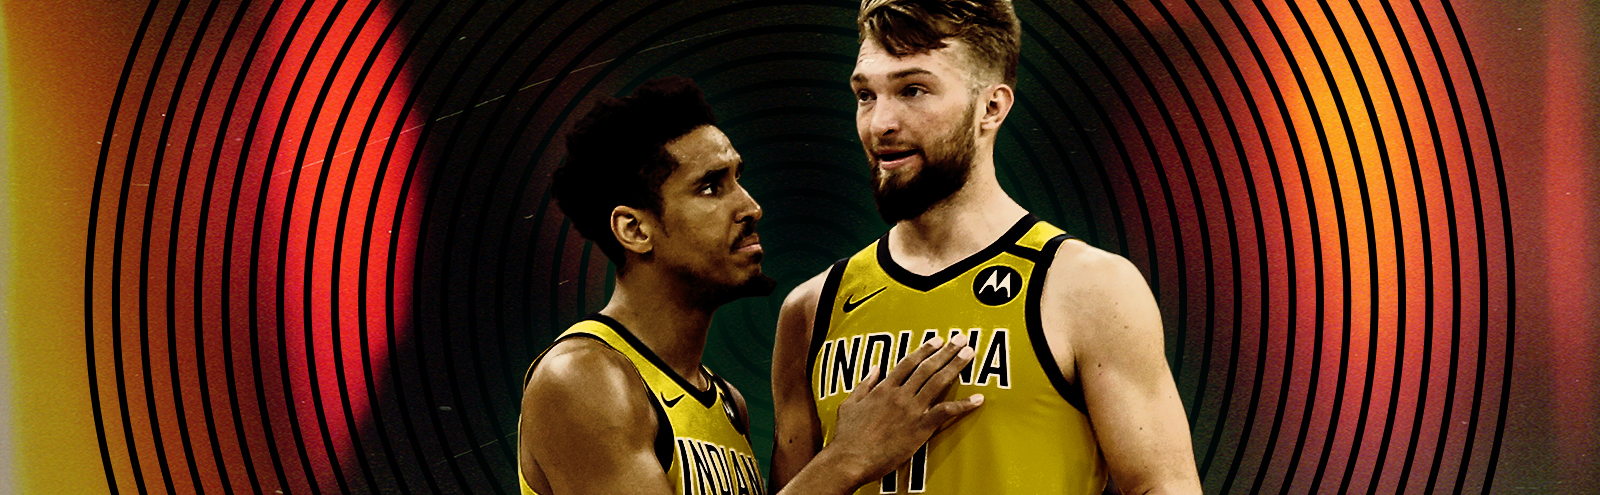 The Indiana Pacers And The Challenges Of Rebuilding Without Tearing Down - torn up soviet uniform roblox